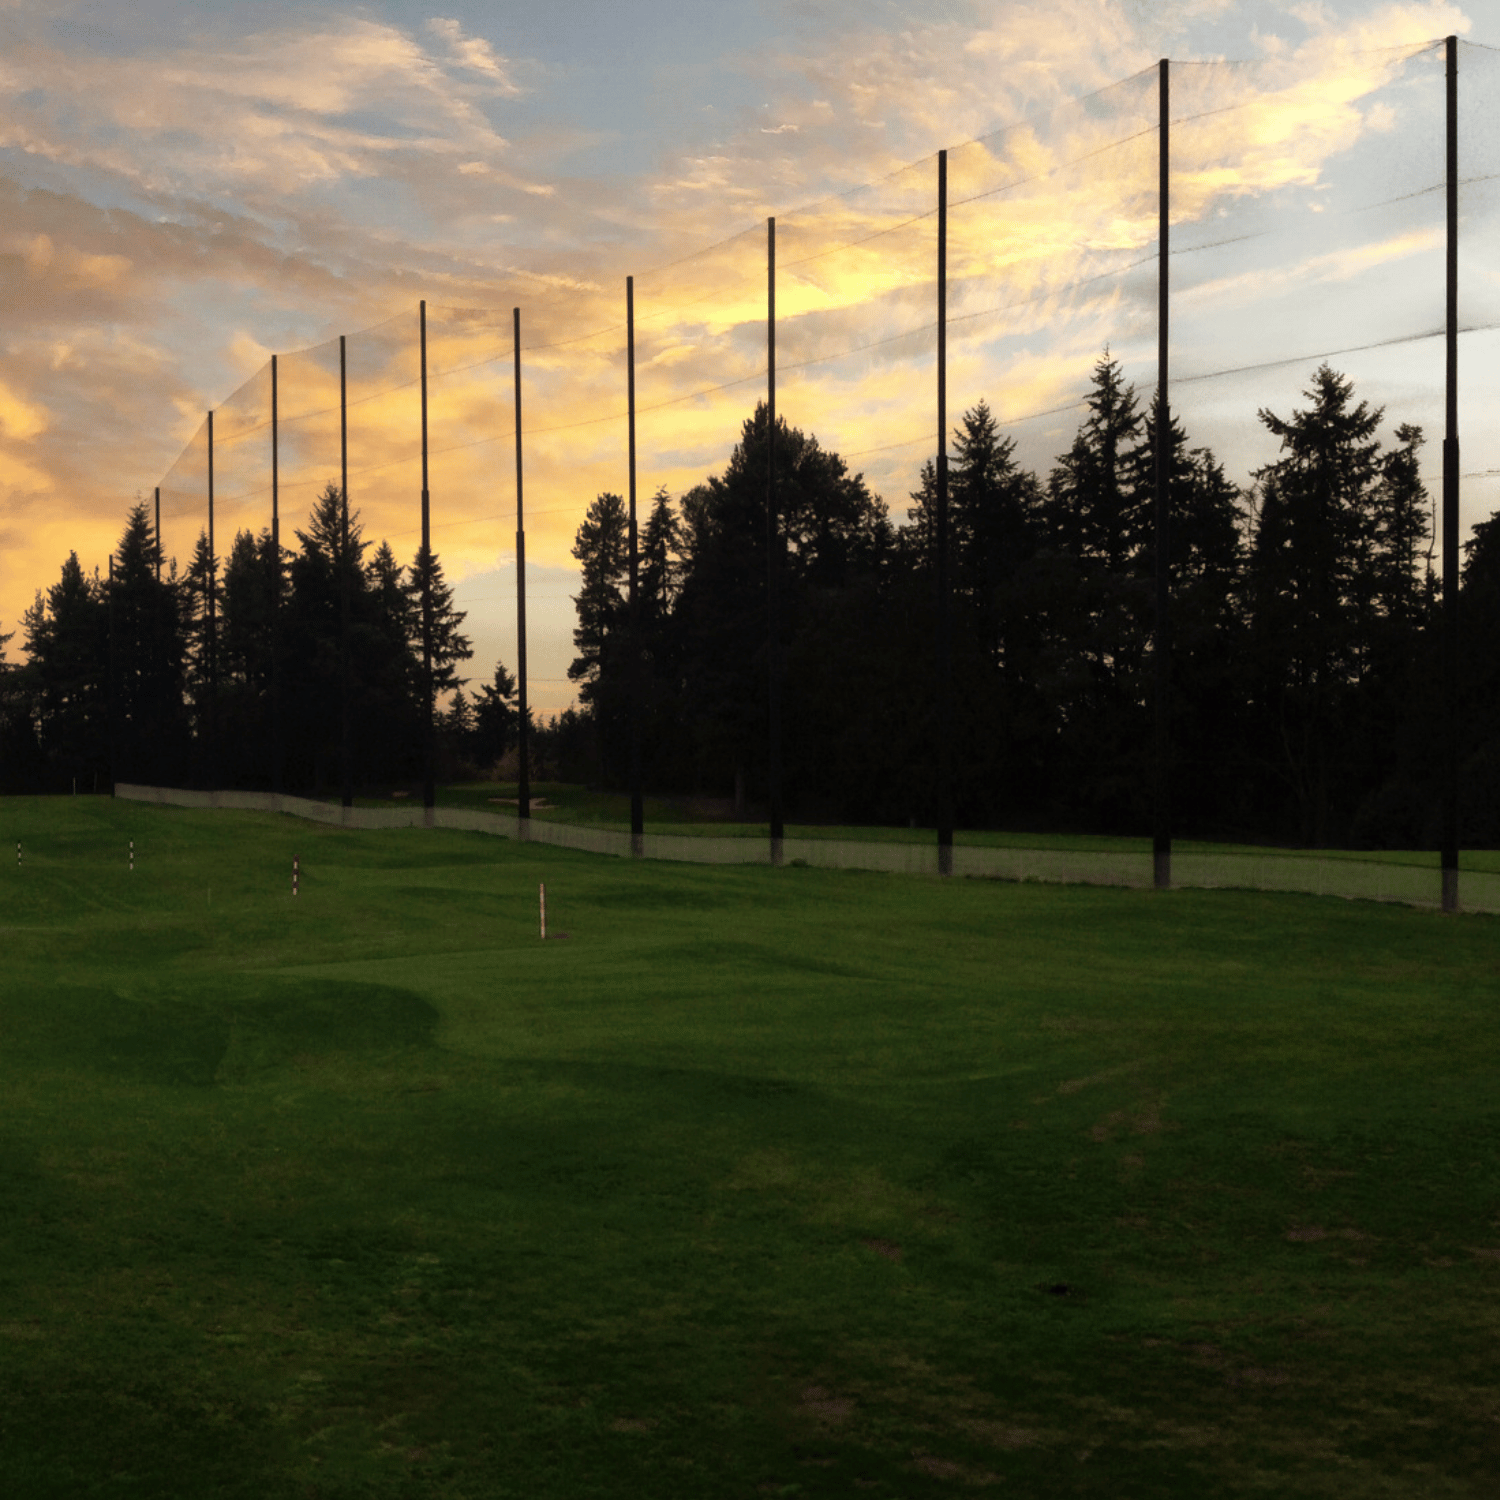 Sun setting at Jackson park golf course over the top of driving range nets